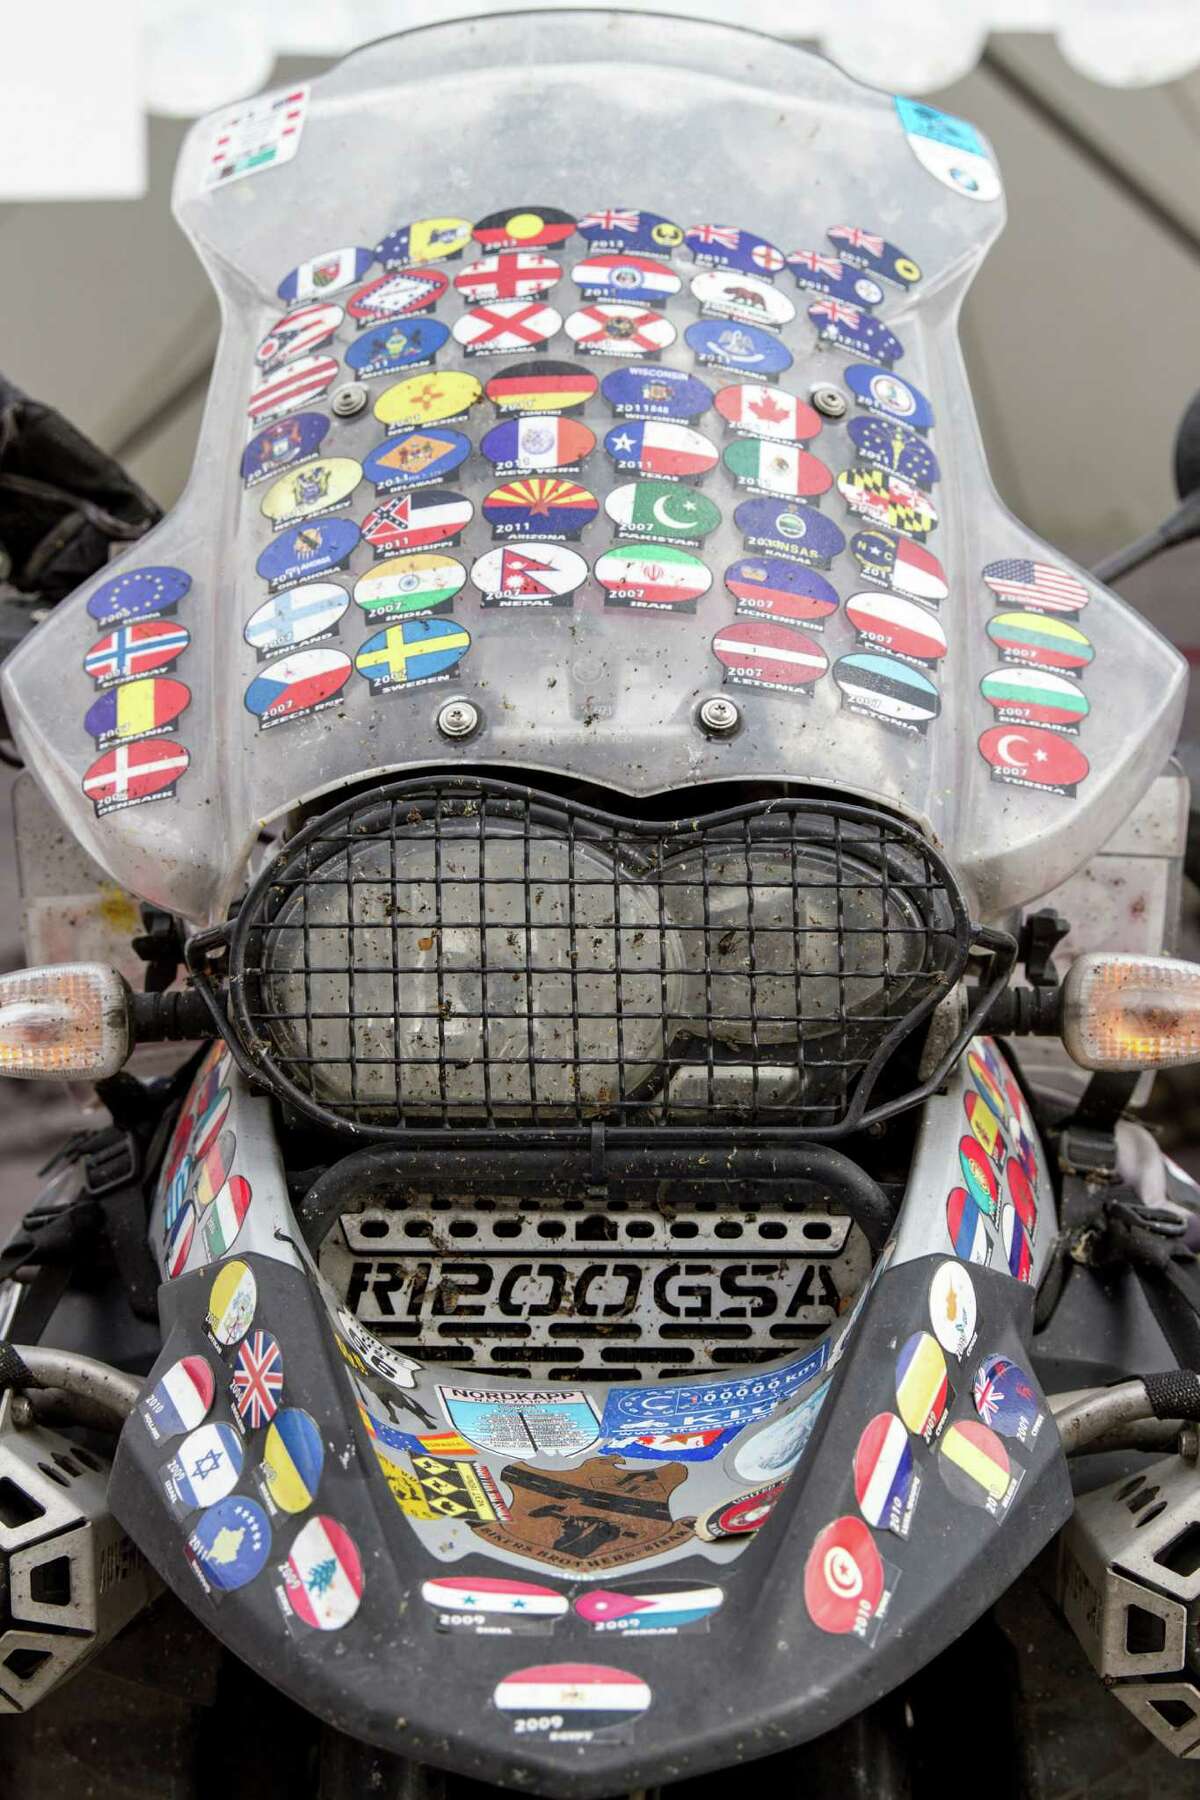 In this July 3, 2015 photo, a motorcycle ridden on a world tour is displayed at the BMW Motorrad Days in Garmisch-Partenkirchen, Germany. The annual event draws BMW enthusiasts from around the world. The 2016 event is scheduled for July 1 to 3. (AP Photo/Erik Schelzig)